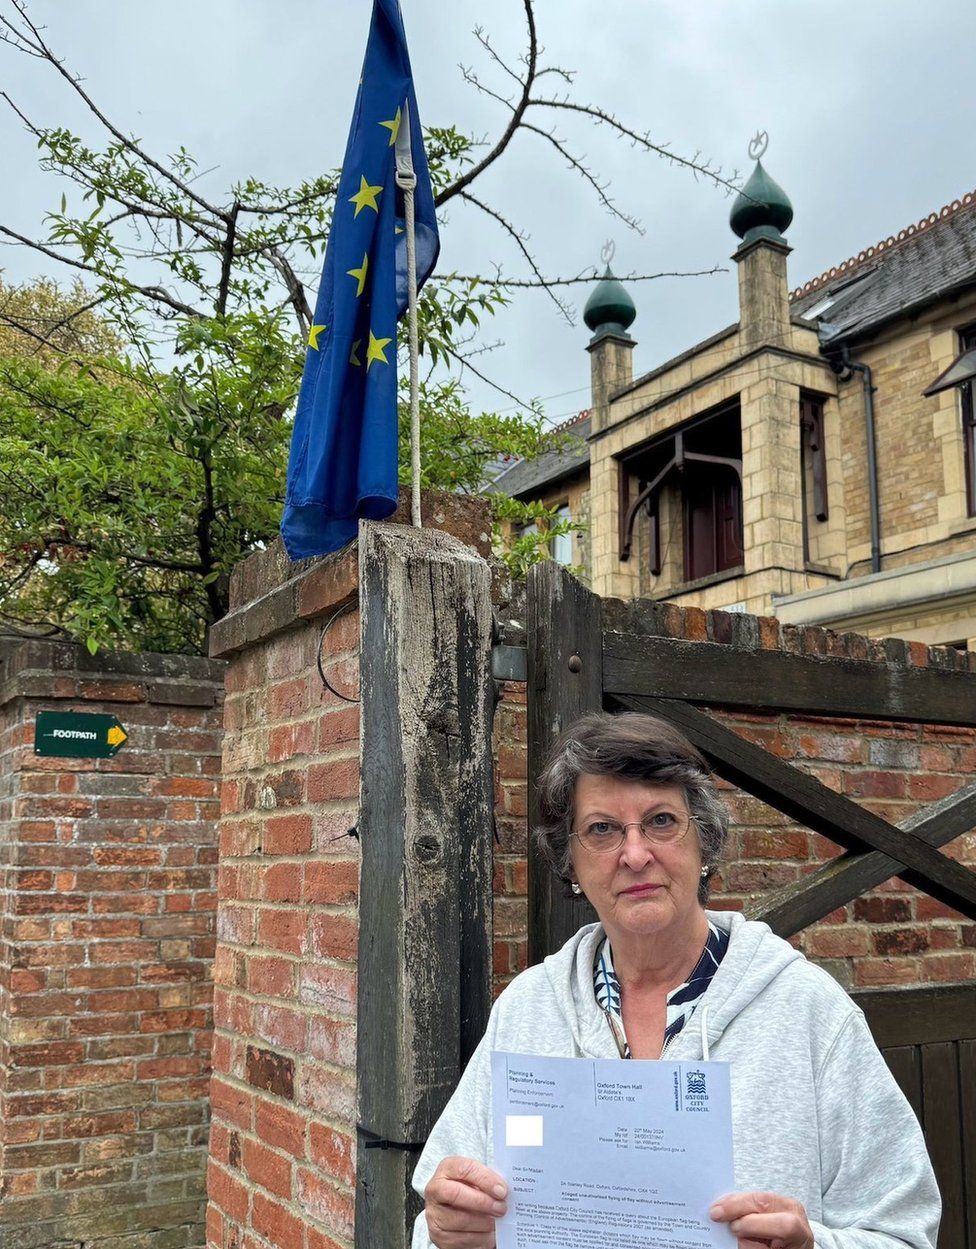 Catherine Bearder, who has short greying, brown hair and is wearing a pale grey, hooded sweater, thin-rimmed round glasses and pearl earrings, pictured outside her home with a Council of Europe flag flying from the top of a tall wooden gatepost. There is also a high brick wall with a tree on the other side